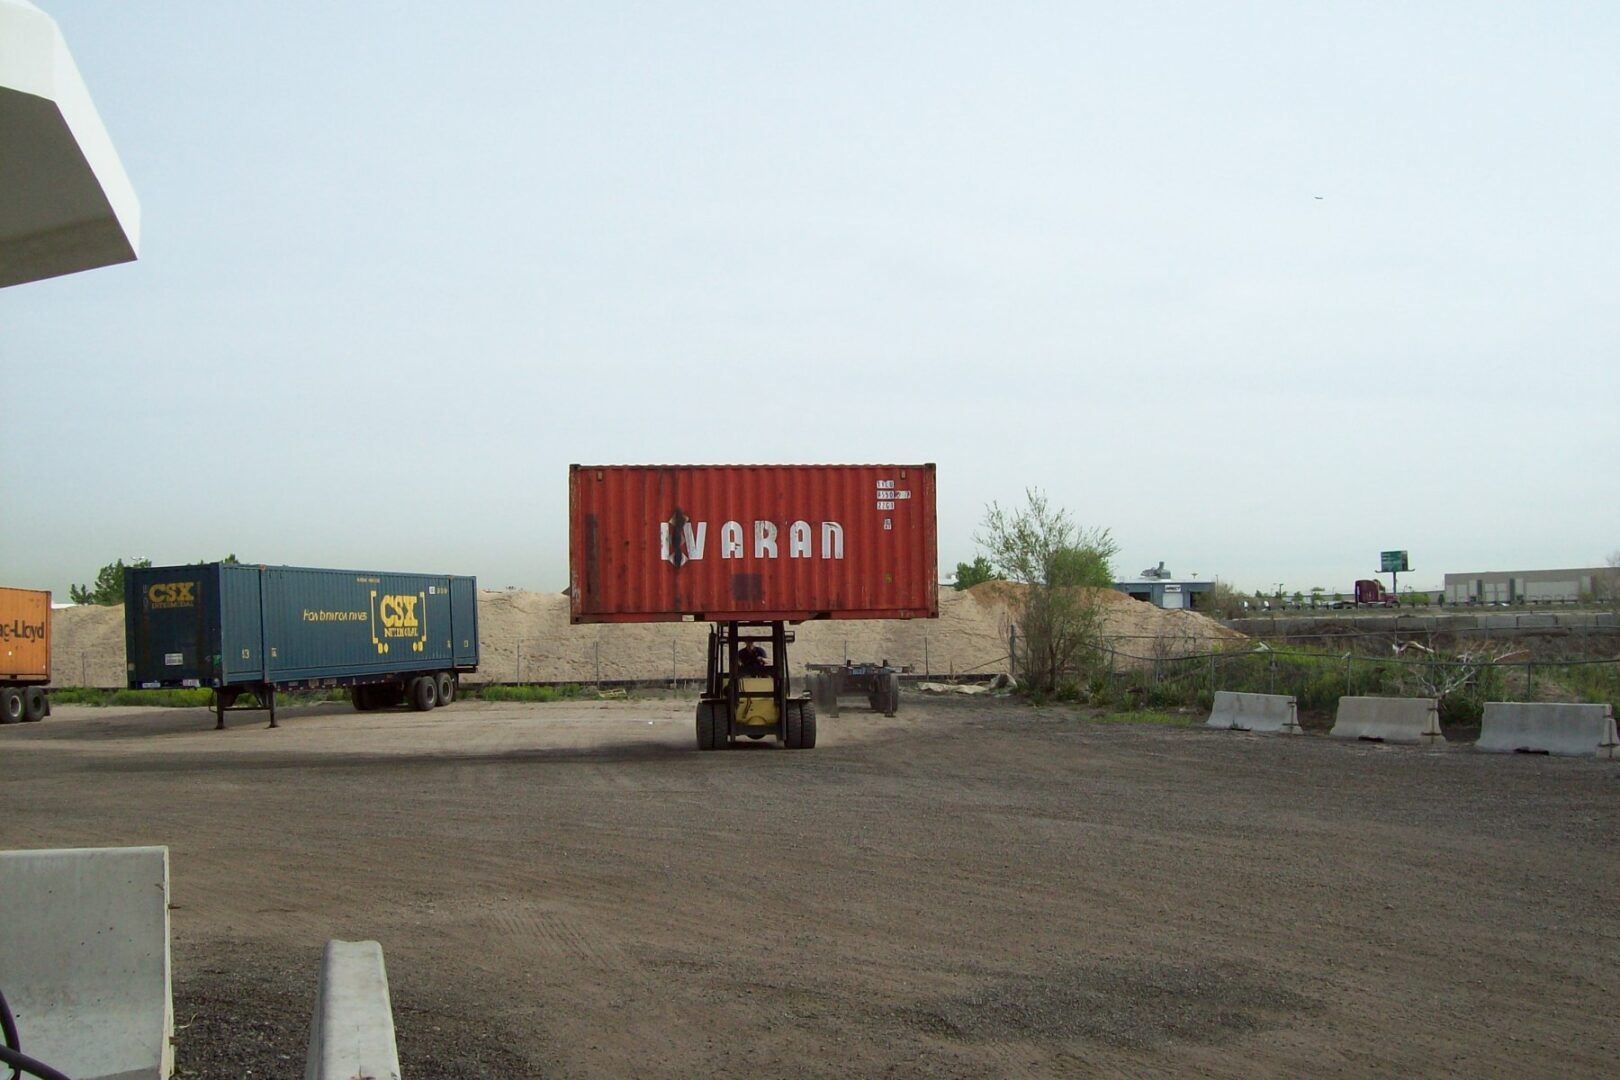 A forklift transporting a red shipping container